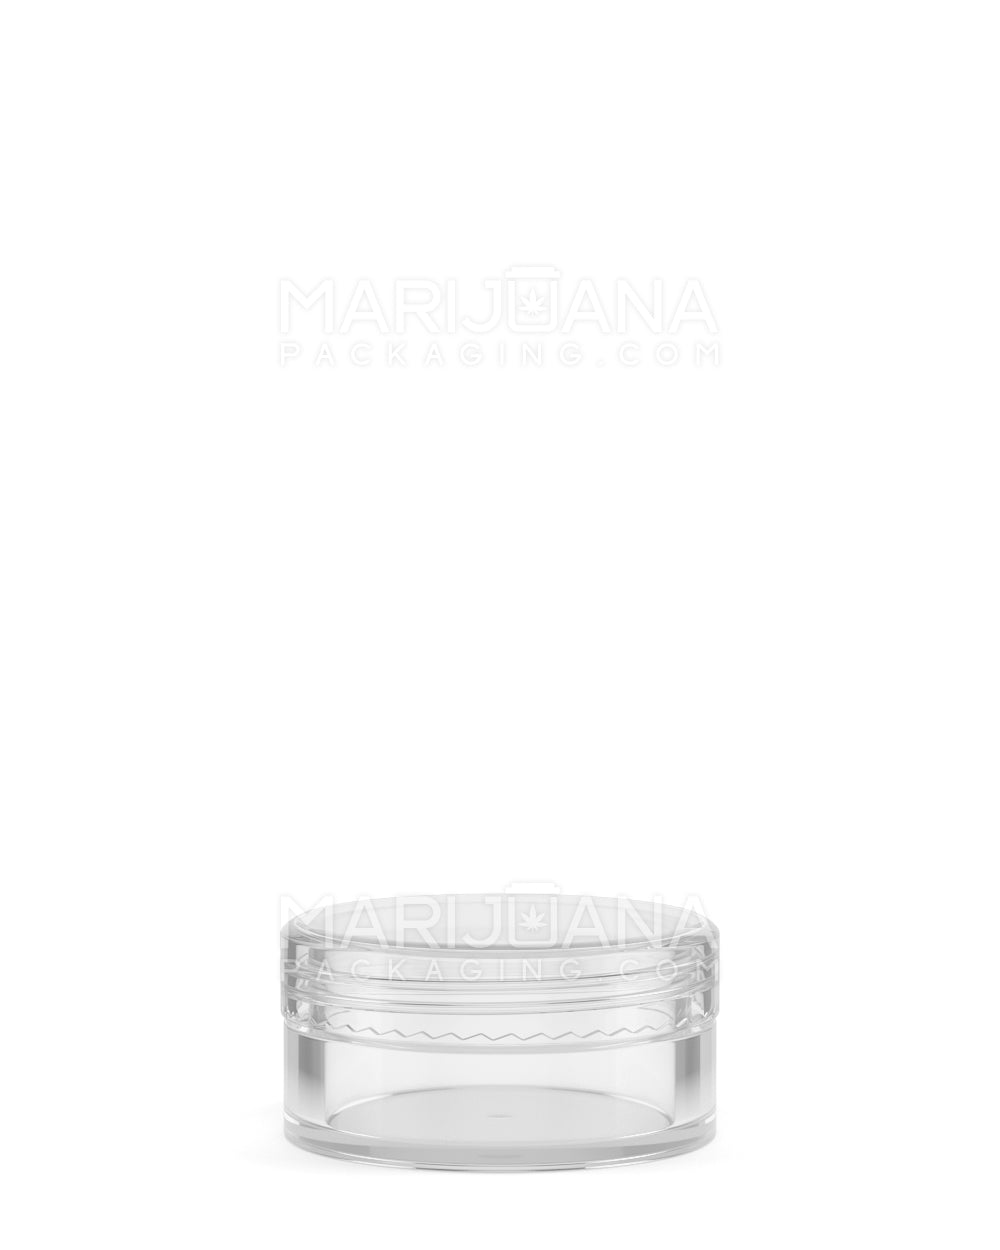 Clear Concentrate Containers w/ Screw Top Cap | 7mL - Acrylic - 200 Count - 2